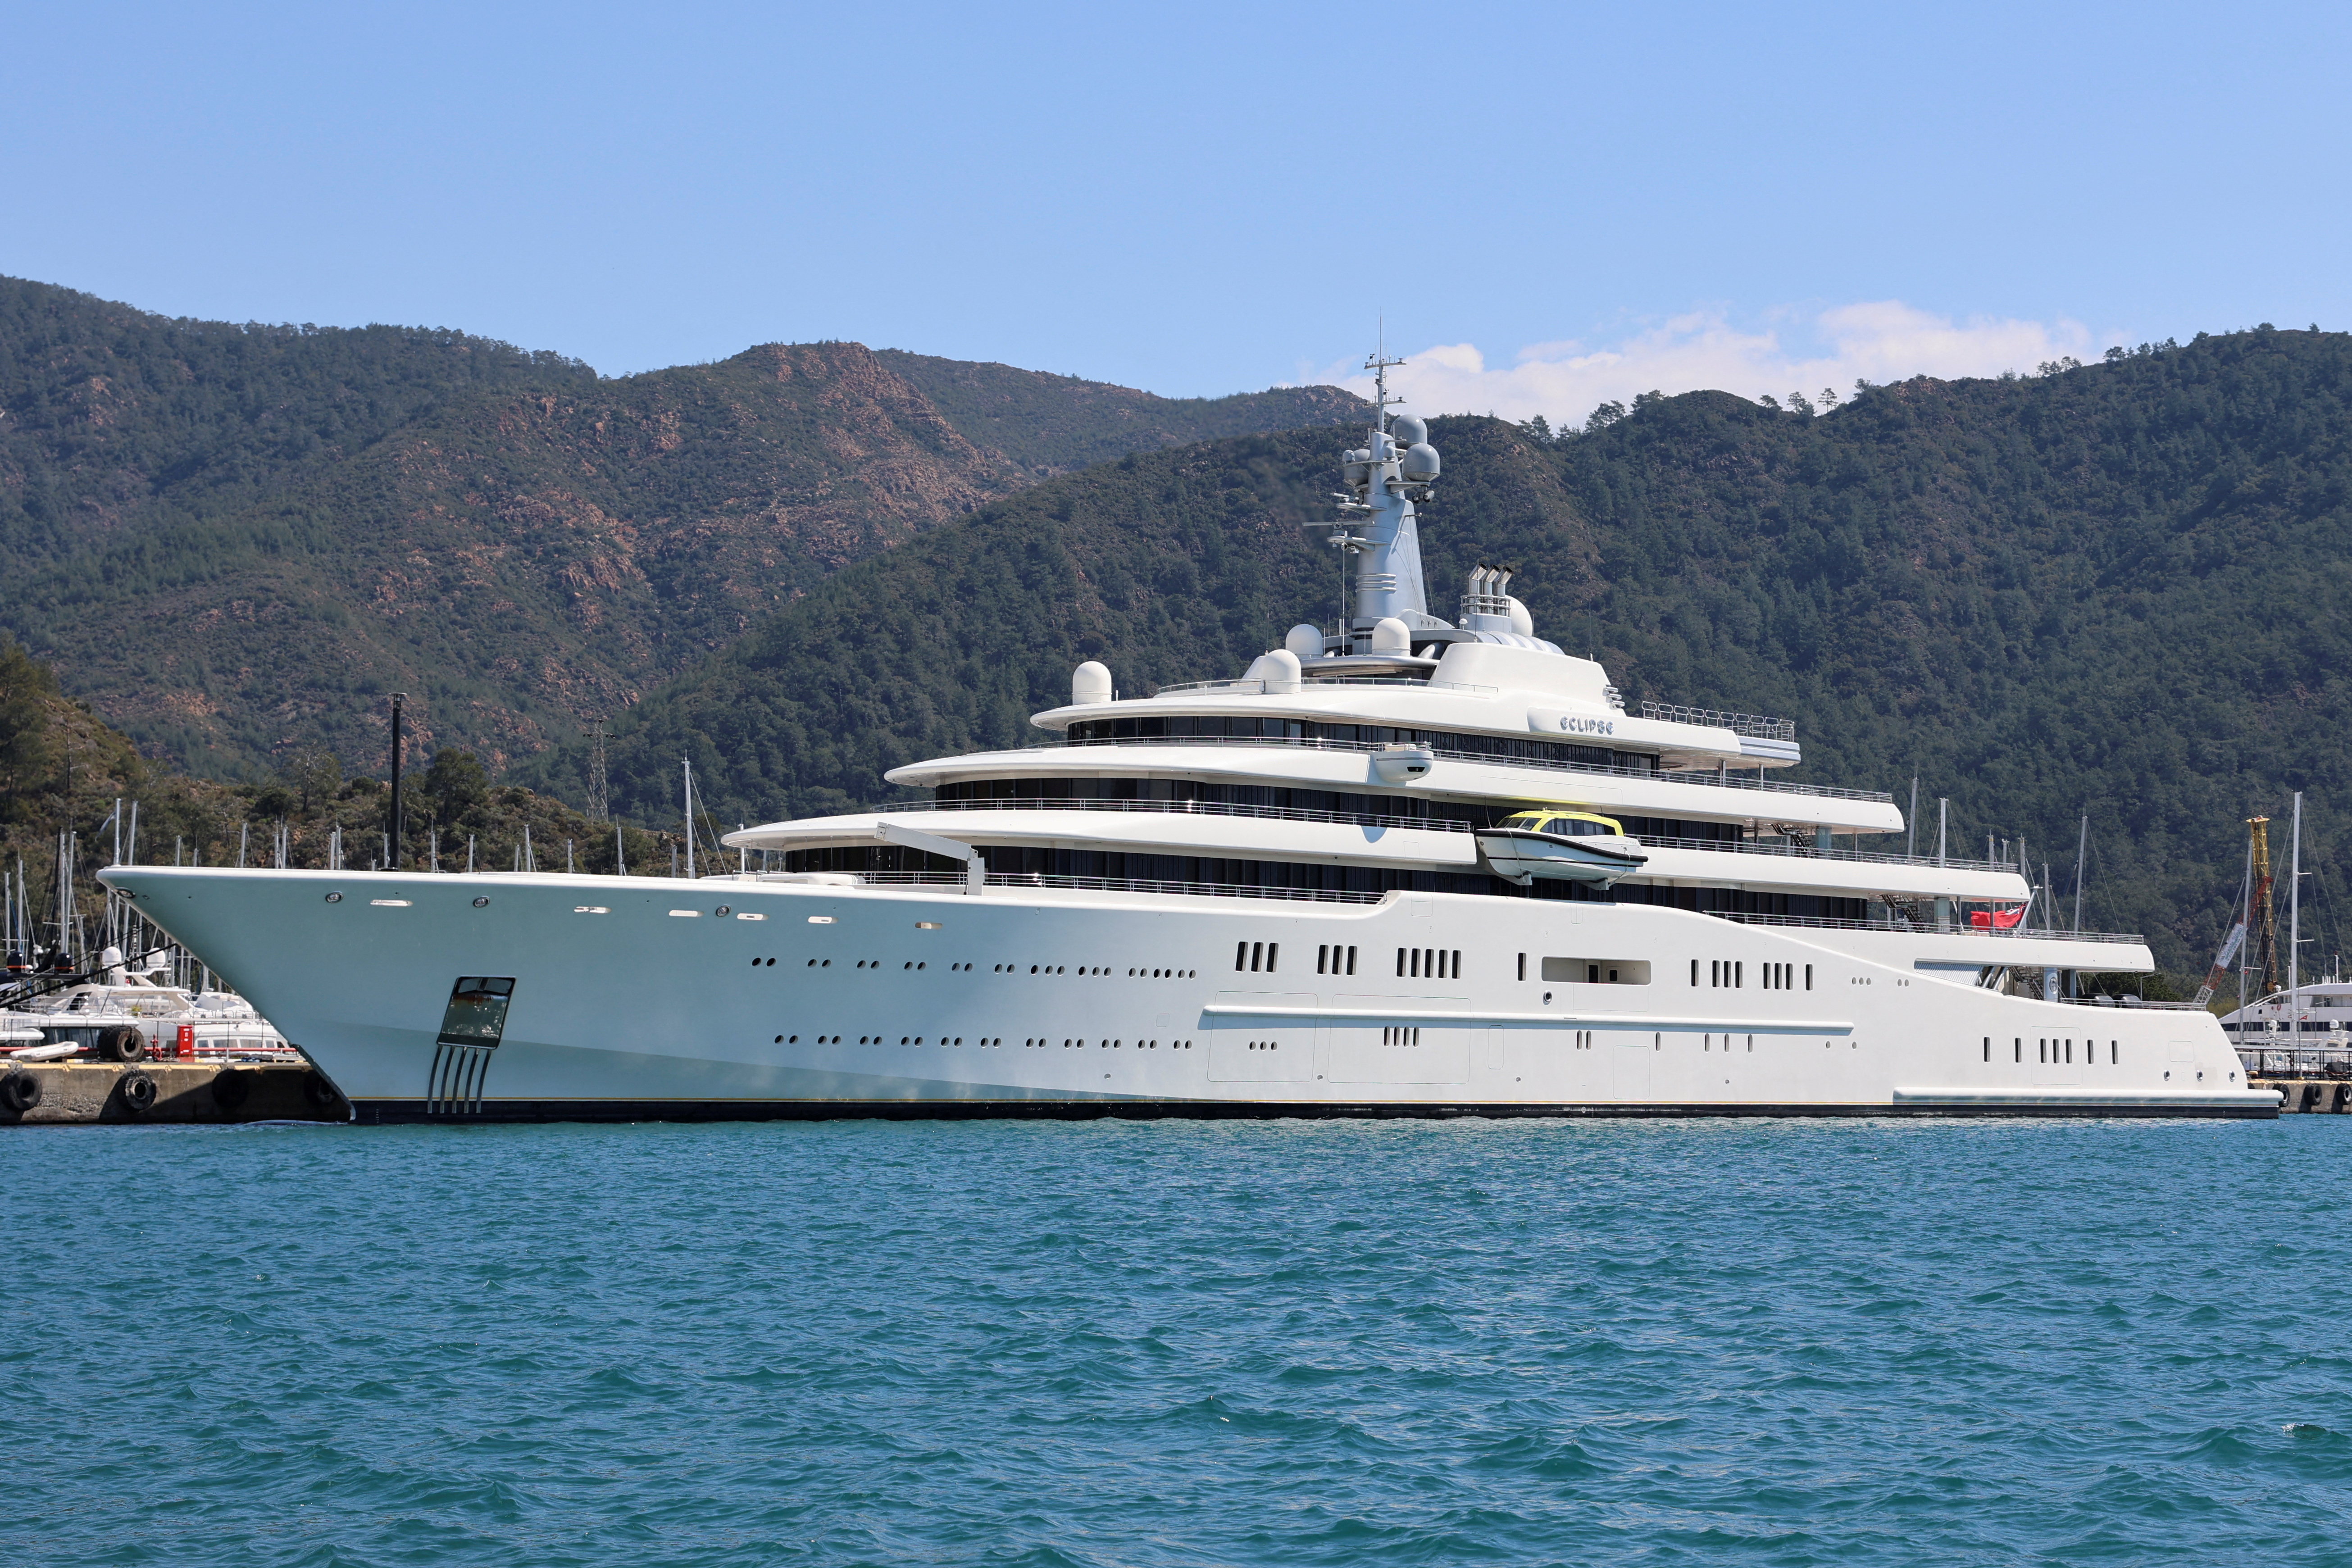 Eclipse, a superyacht linked to sanctioned Russian oligarch Abramovich, is docked in Marmaris